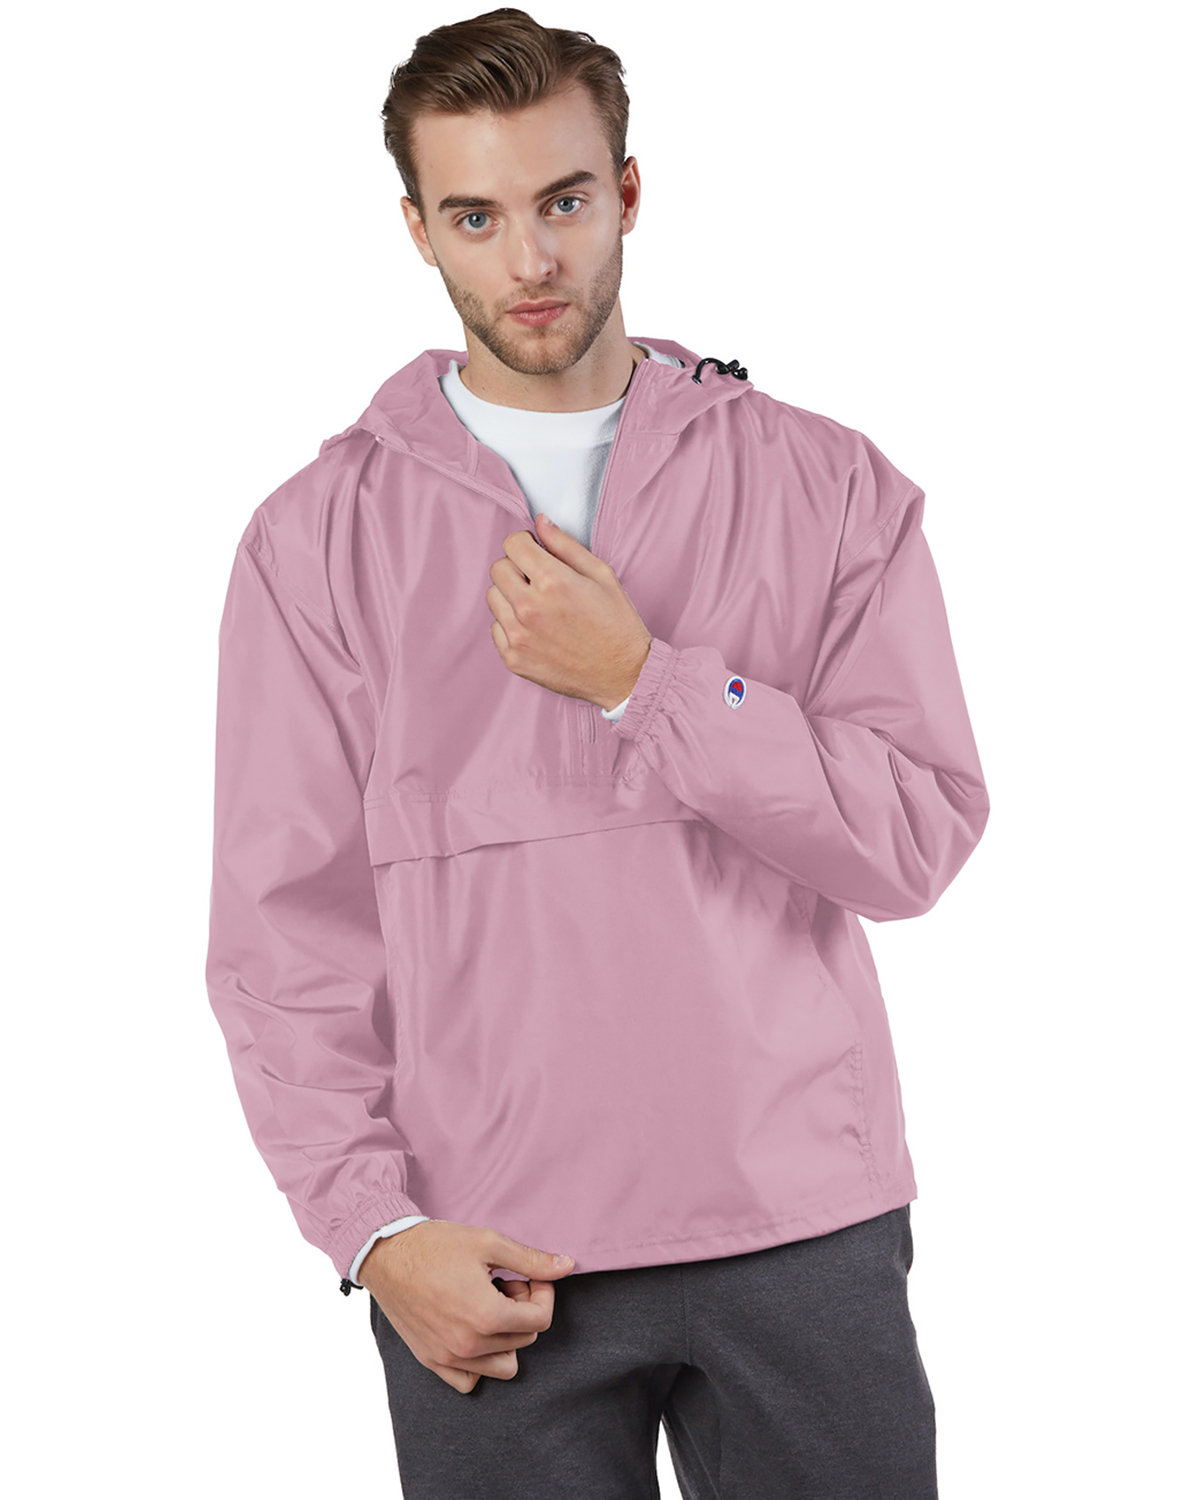 Champion Adult Packable Anorak 1/4 Zip Jacket PINK CANDY 